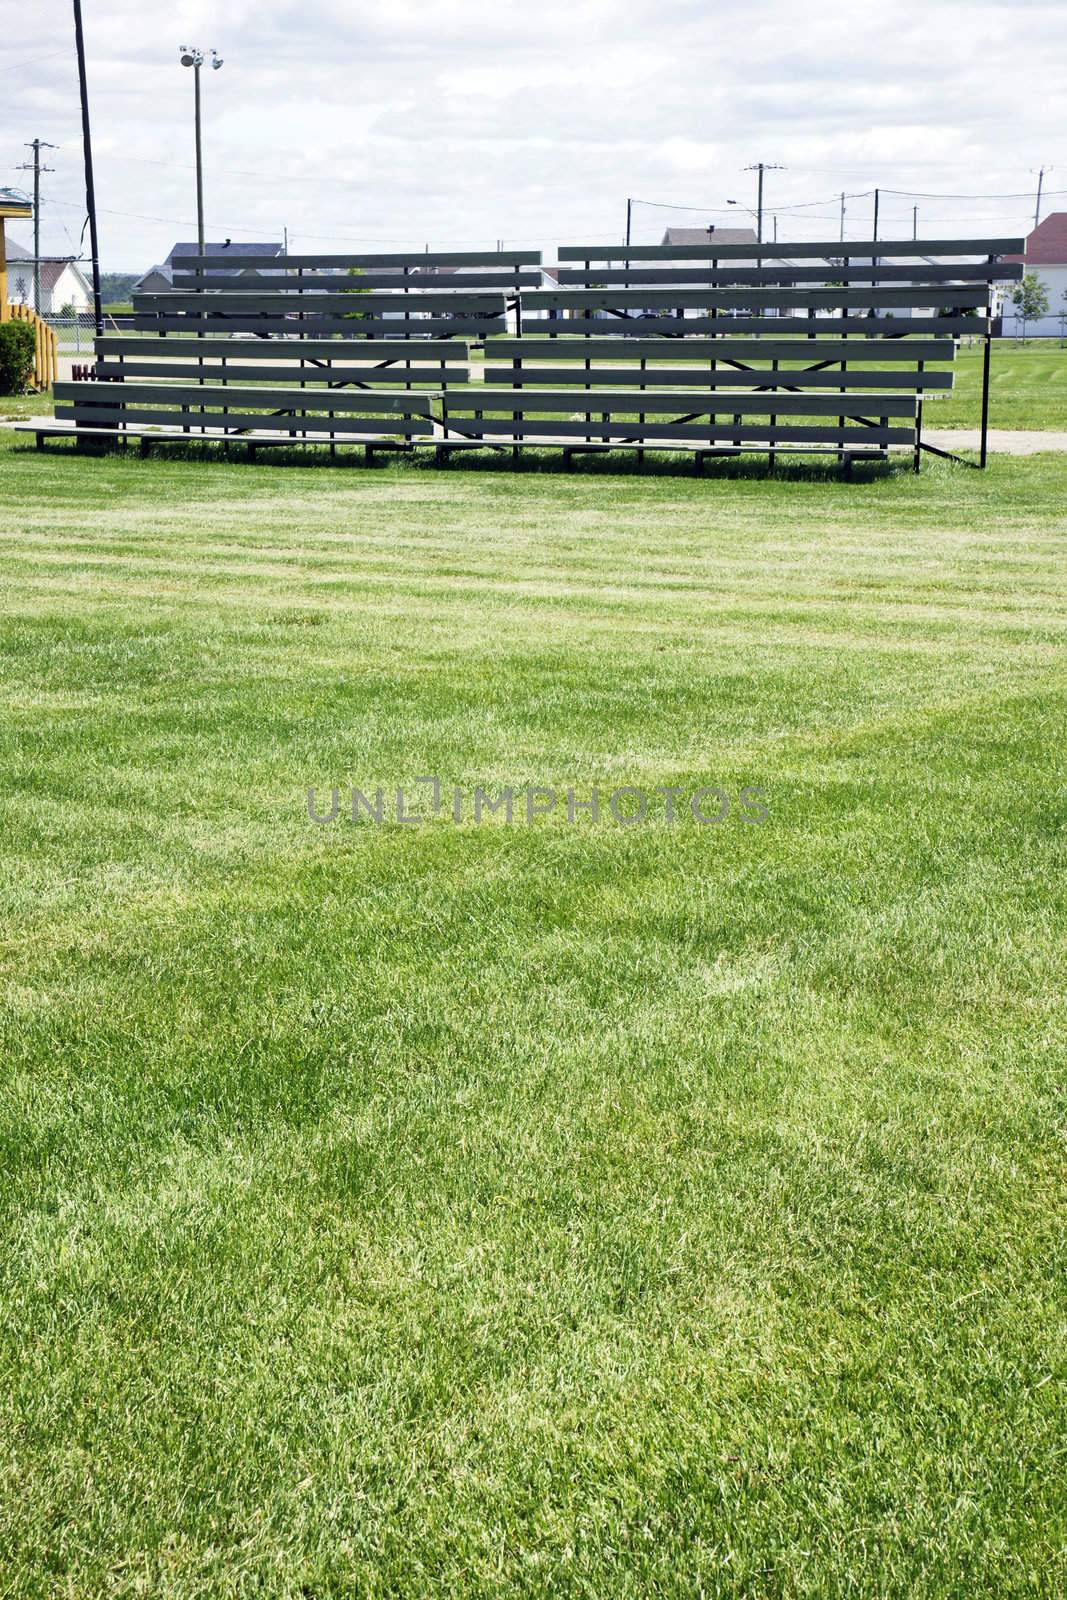 Bleachers and grass by Mirage3